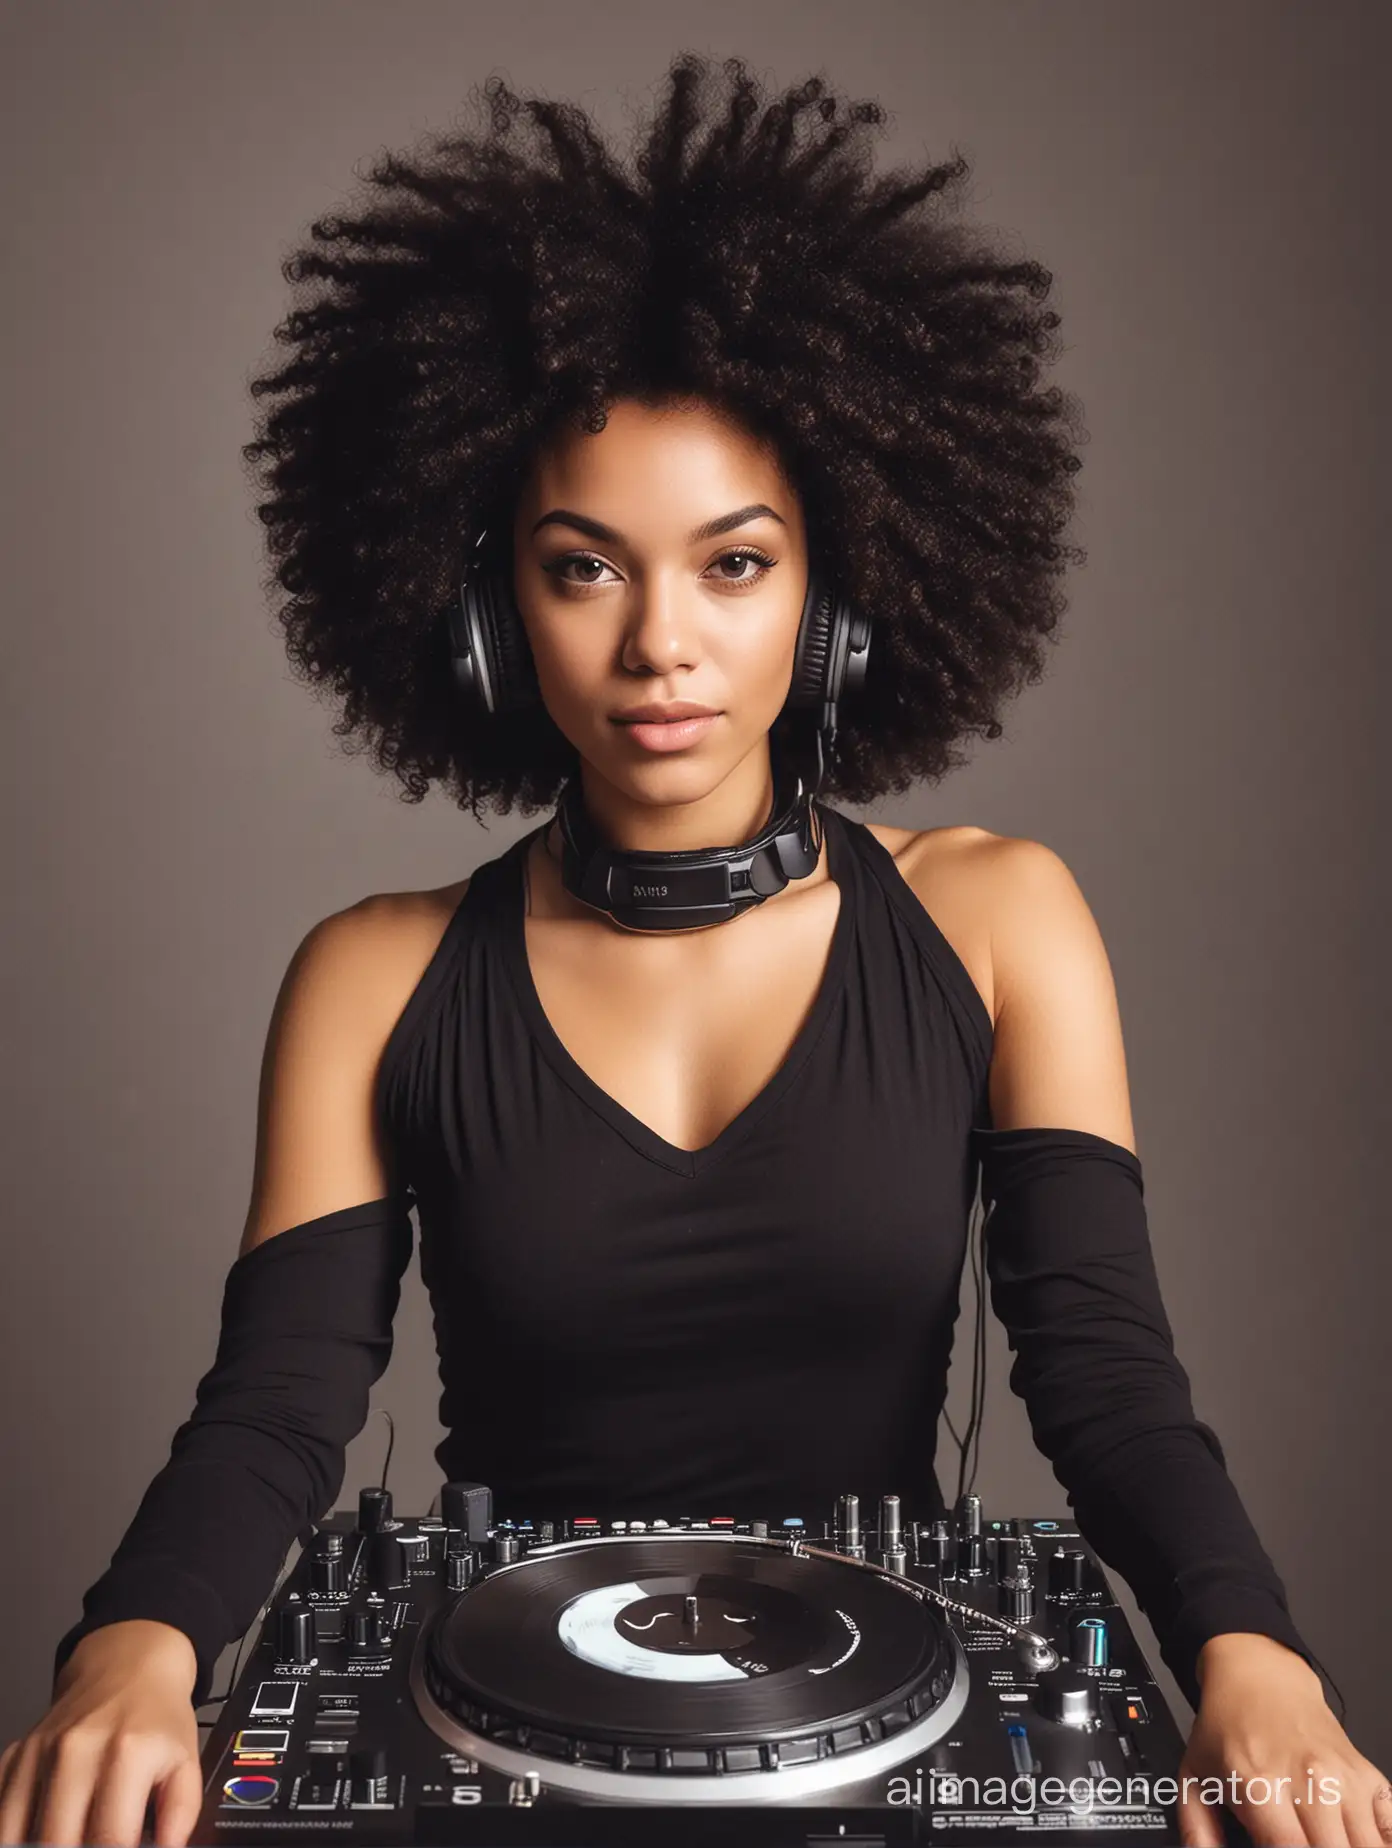 African-American-Female-DJ-with-Afro-Playing-Music